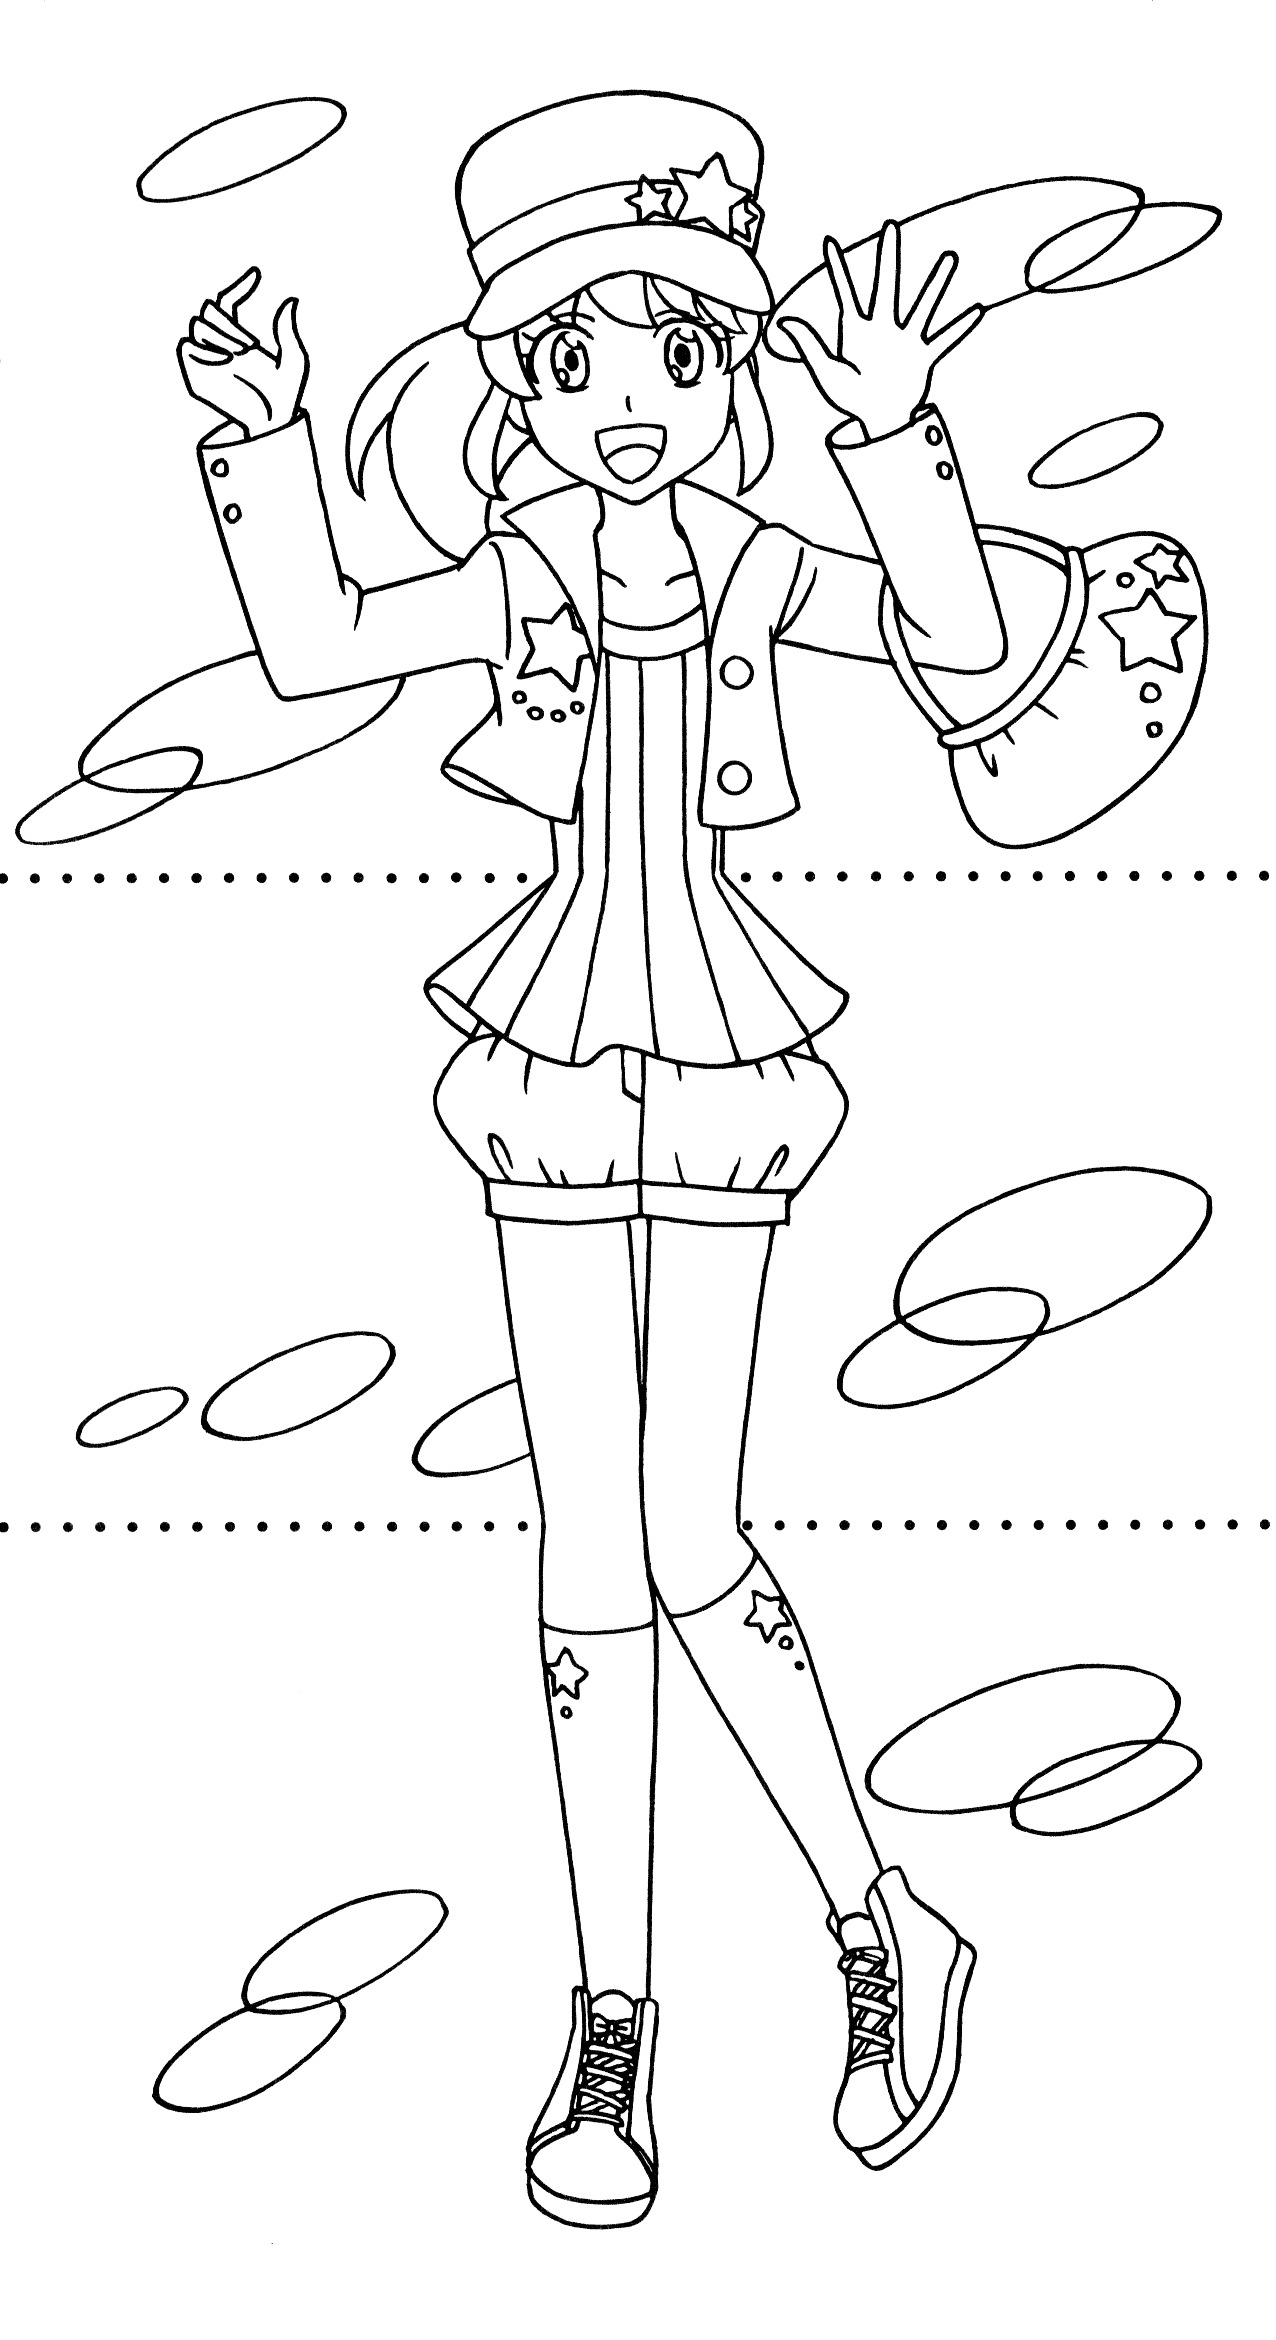 Happiness Charge Precure Dressup Coloring Book 29